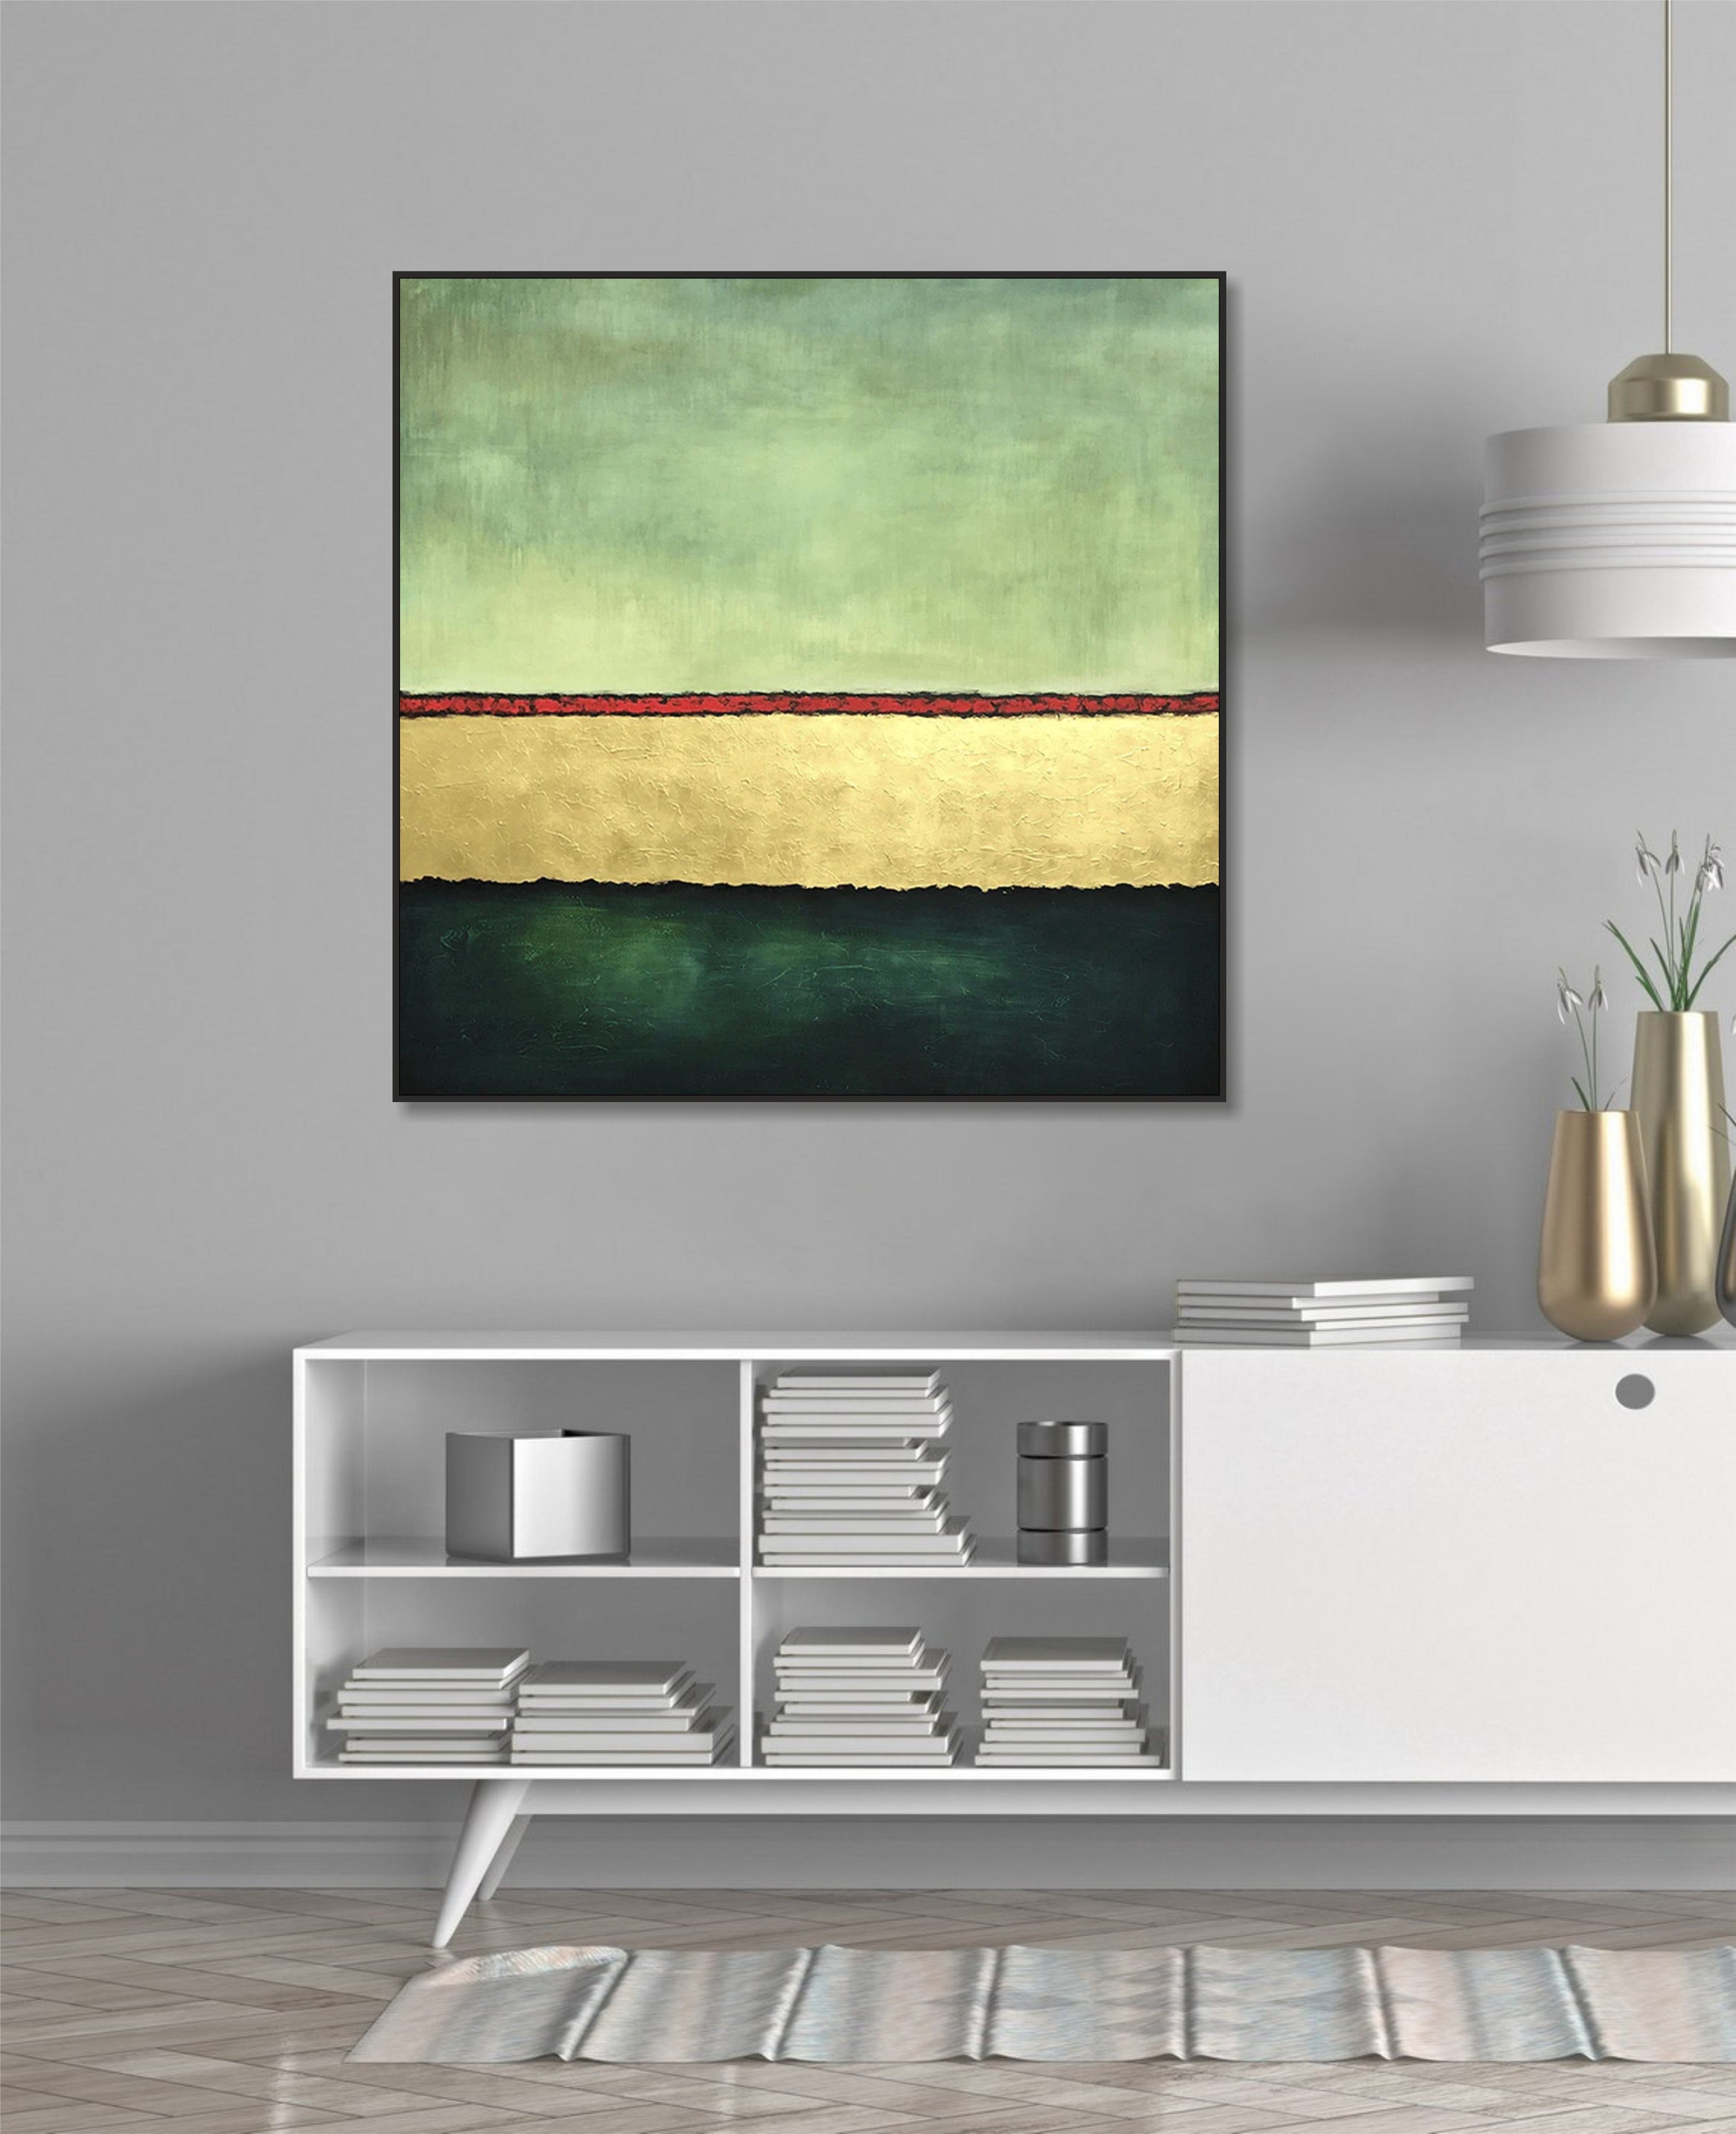 Beautiful ideas on how to decorate a hallway with canvas large slider2-image-2